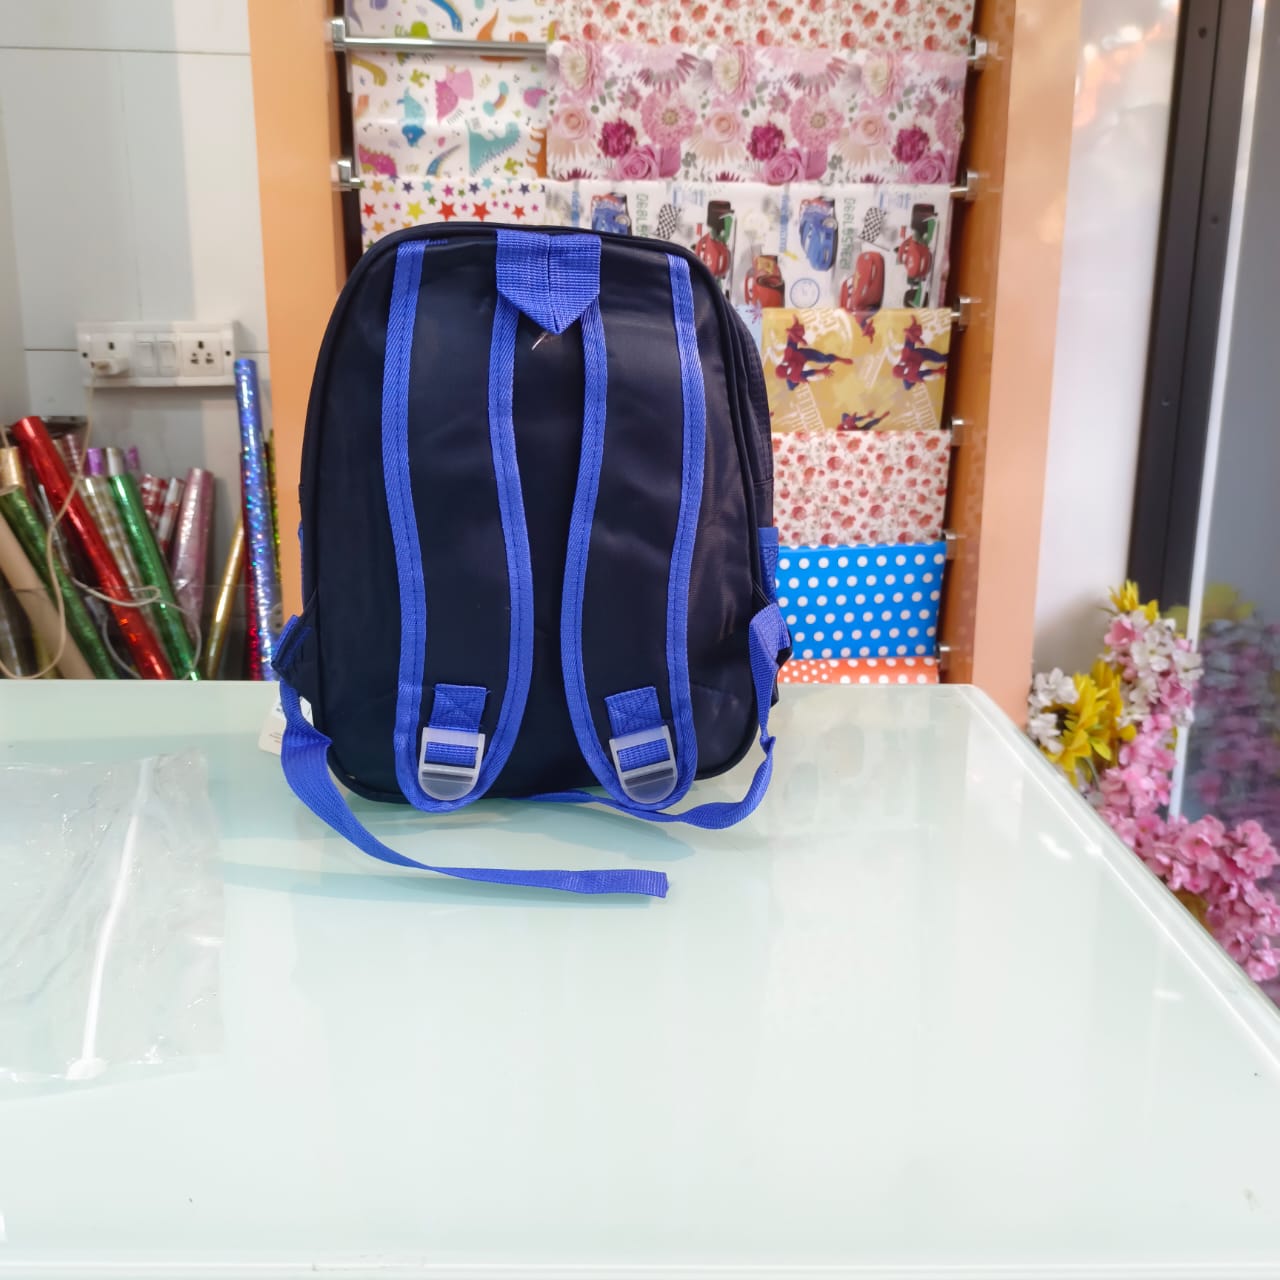 School Backpack for Kids Waterproof Unicon School Bag for Boys&girls Large Capacity Kids School Backpacks for Picnic, Tuition, Travel, Camping, Burden-relief Bag for Kids